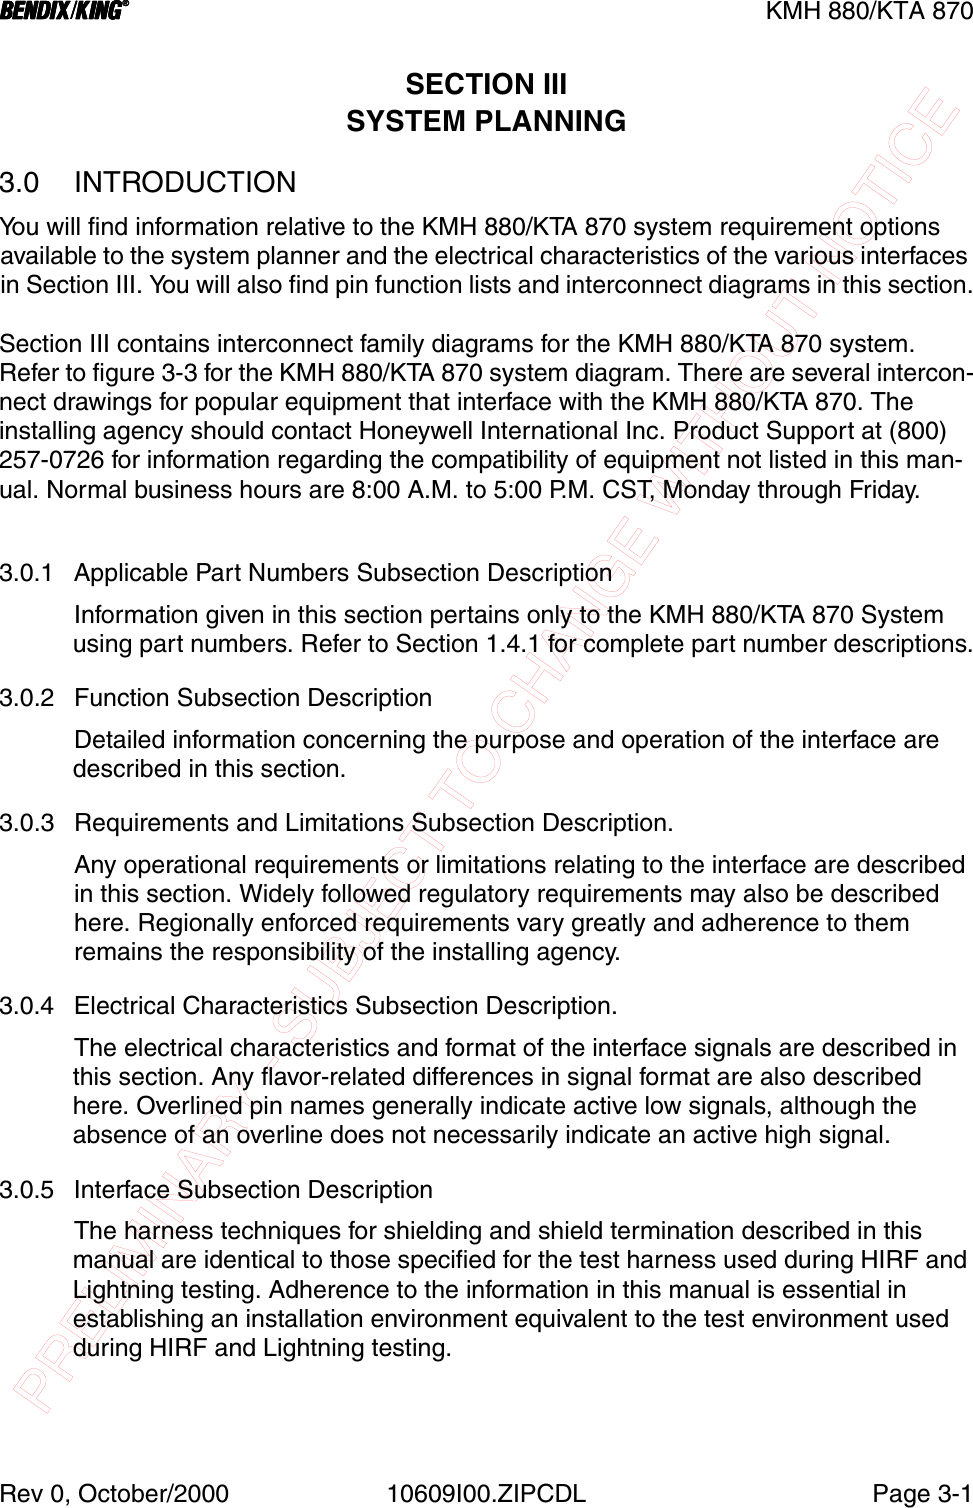 PRELIMINARY - SUBJECT TO CHANGE WITHOUT NOTICEBBBBKMH 880/KTA 870Rev 0, October/2000 10609I00.ZIPCDL Page 3-1SECTION IIISYSTEM PLANNING3.0 INTRODUCTIONYou will find information relative to the KMH 880/KTA 870 system requirement options available to the system planner and the electrical characteristics of the various interfaces in Section III. You will also find pin function lists and interconnect diagrams in this section.Section III contains interconnect family diagrams for the KMH 880/KTA 870 system. Refer to figure 3-3 for the KMH 880/KTA 870 system diagram. There are several intercon-nect drawings for popular equipment that interface with the KMH 880/KTA 870. The installing agency should contact Honeywell International Inc. Product Support at (800) 257-0726 for information regarding the compatibility of equipment not listed in this man-ual. Normal business hours are 8:00 A.M. to 5:00 P.M. CST, Monday through Friday.3.0.1 Applicable Part Numbers Subsection DescriptionInformation given in this section pertains only to the KMH 880/KTA 870 System using part numbers. Refer to Section 1.4.1 for complete part number descriptions.3.0.2 Function Subsection DescriptionDetailed information concerning the purpose and operation of the interface are described in this section.3.0.3 Requirements and Limitations Subsection Description.Any operational requirements or limitations relating to the interface are described in this section. Widely followed regulatory requirements may also be described here. Regionally enforced requirements vary greatly and adherence to them remains the responsibility of the installing agency.3.0.4 Electrical Characteristics Subsection Description.The electrical characteristics and format of the interface signals are described in this section. Any flavor-related differences in signal format are also described here. Overlined pin names generally indicate active low signals, although the absence of an overline does not necessarily indicate an active high signal.3.0.5 Interface Subsection DescriptionThe harness techniques for shielding and shield termination described in this manual are identical to those specified for the test harness used during HIRF and Lightning testing. Adherence to the information in this manual is essential in establishing an installation environment equivalent to the test environment used during HIRF and Lightning testing.